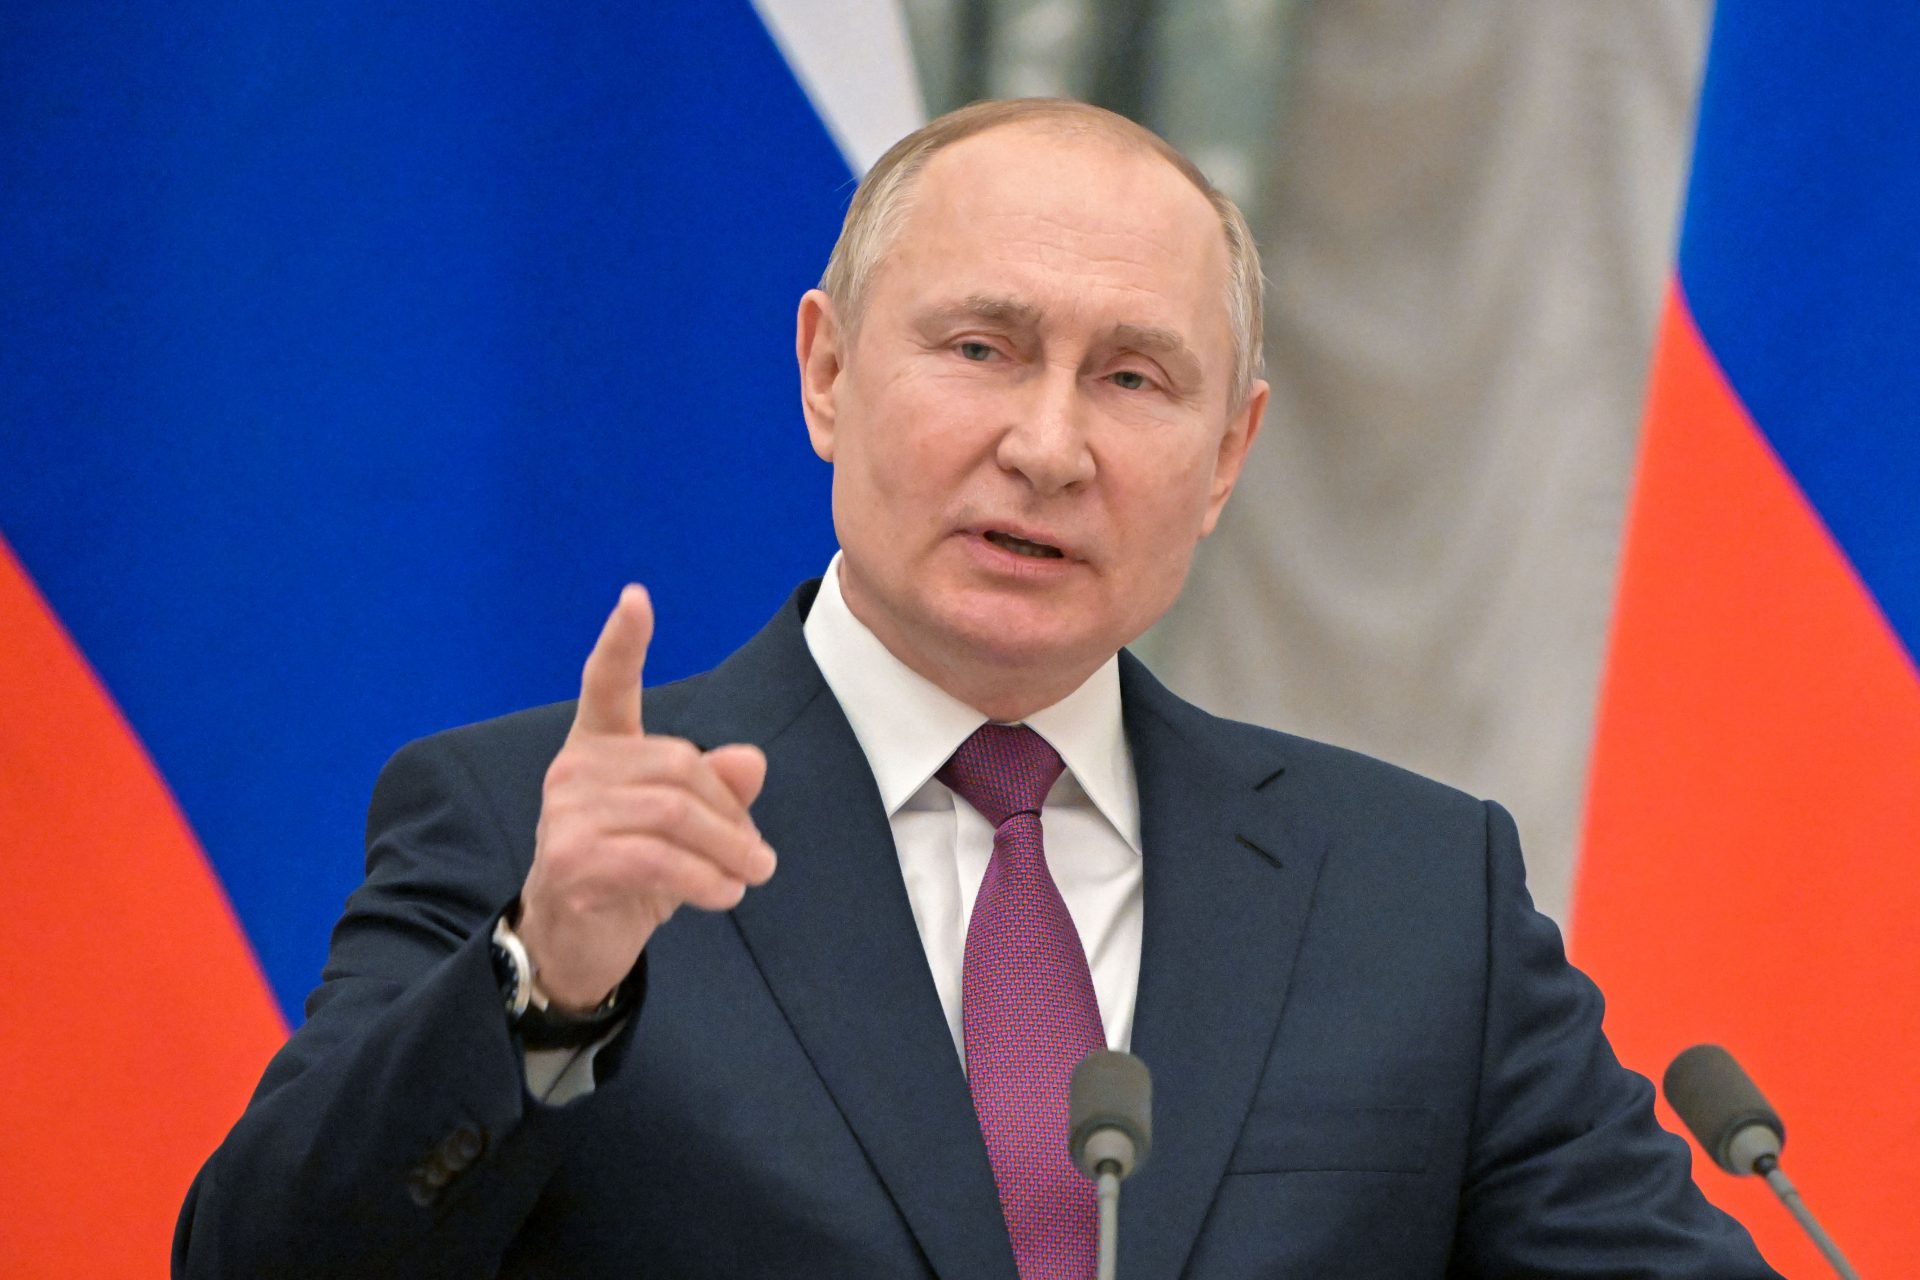 Putin kept his promise to intensify strikes after Belgorod attack